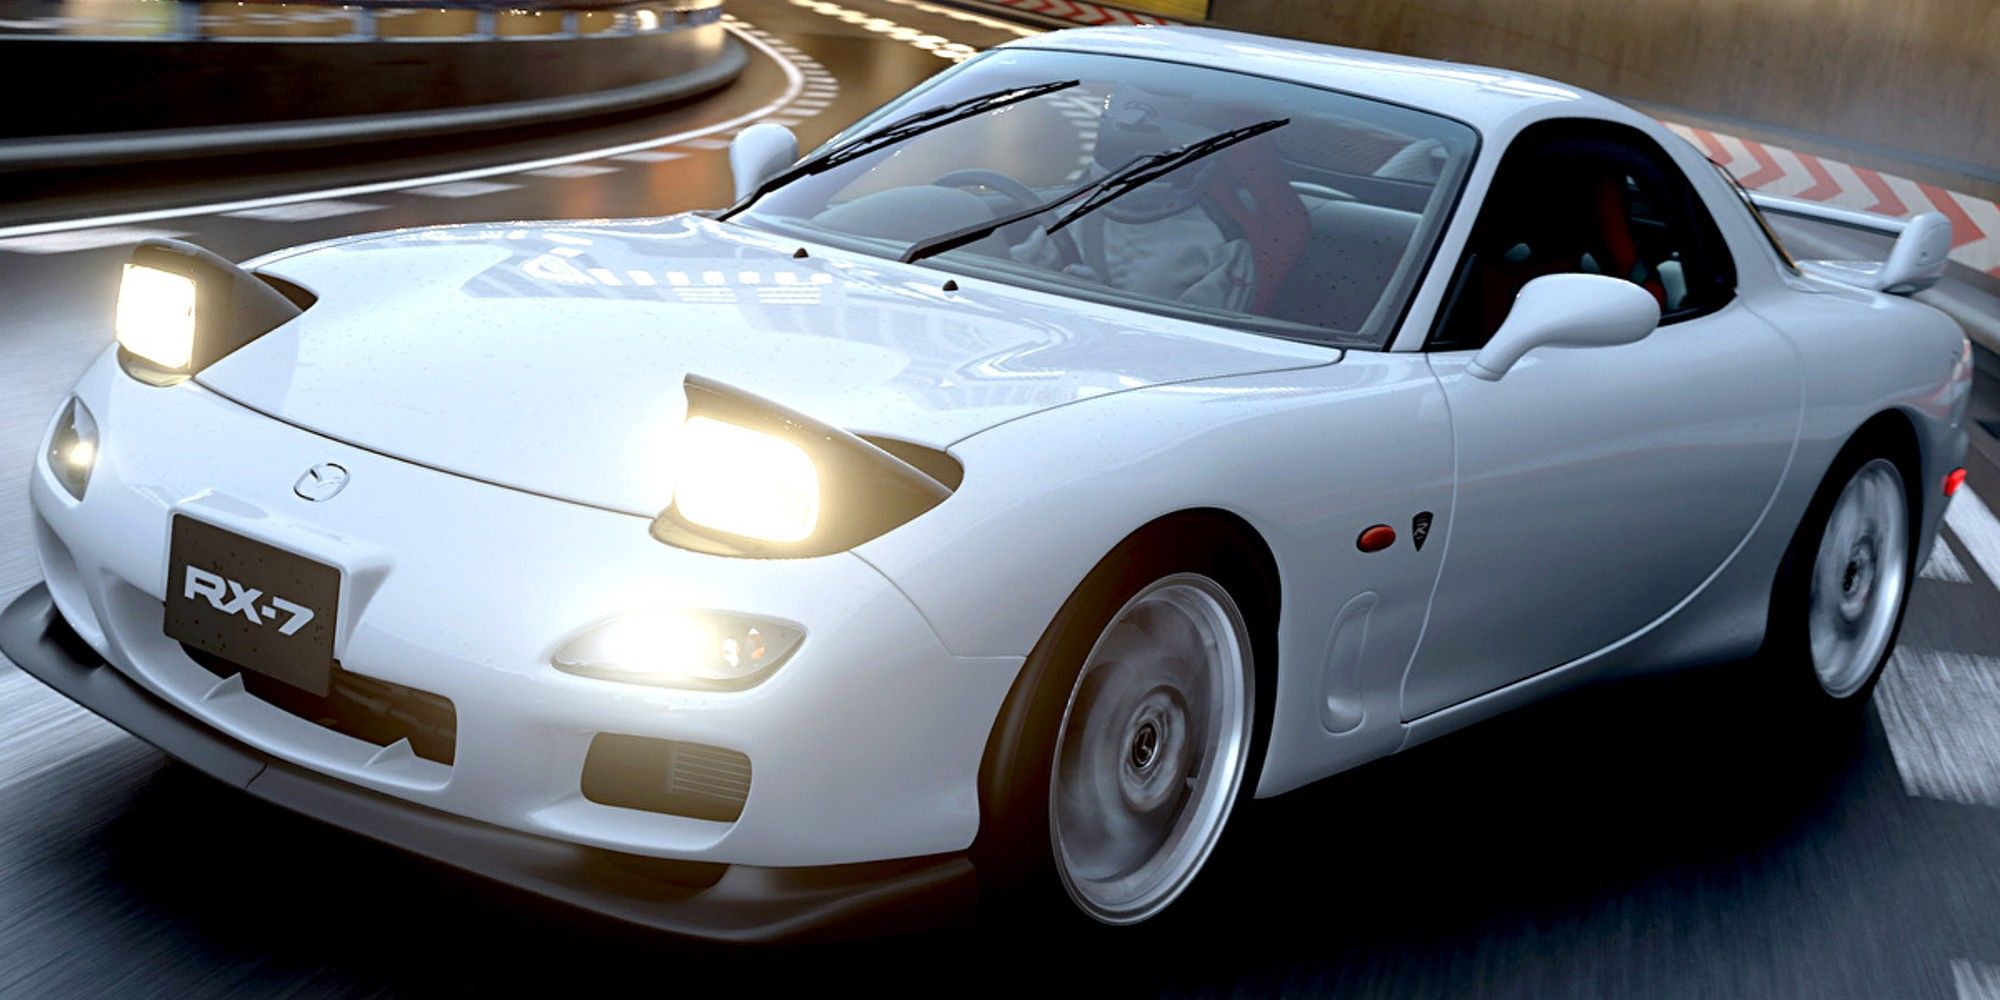 Gran Turismo 7 PC: Steam release coming for GT7?